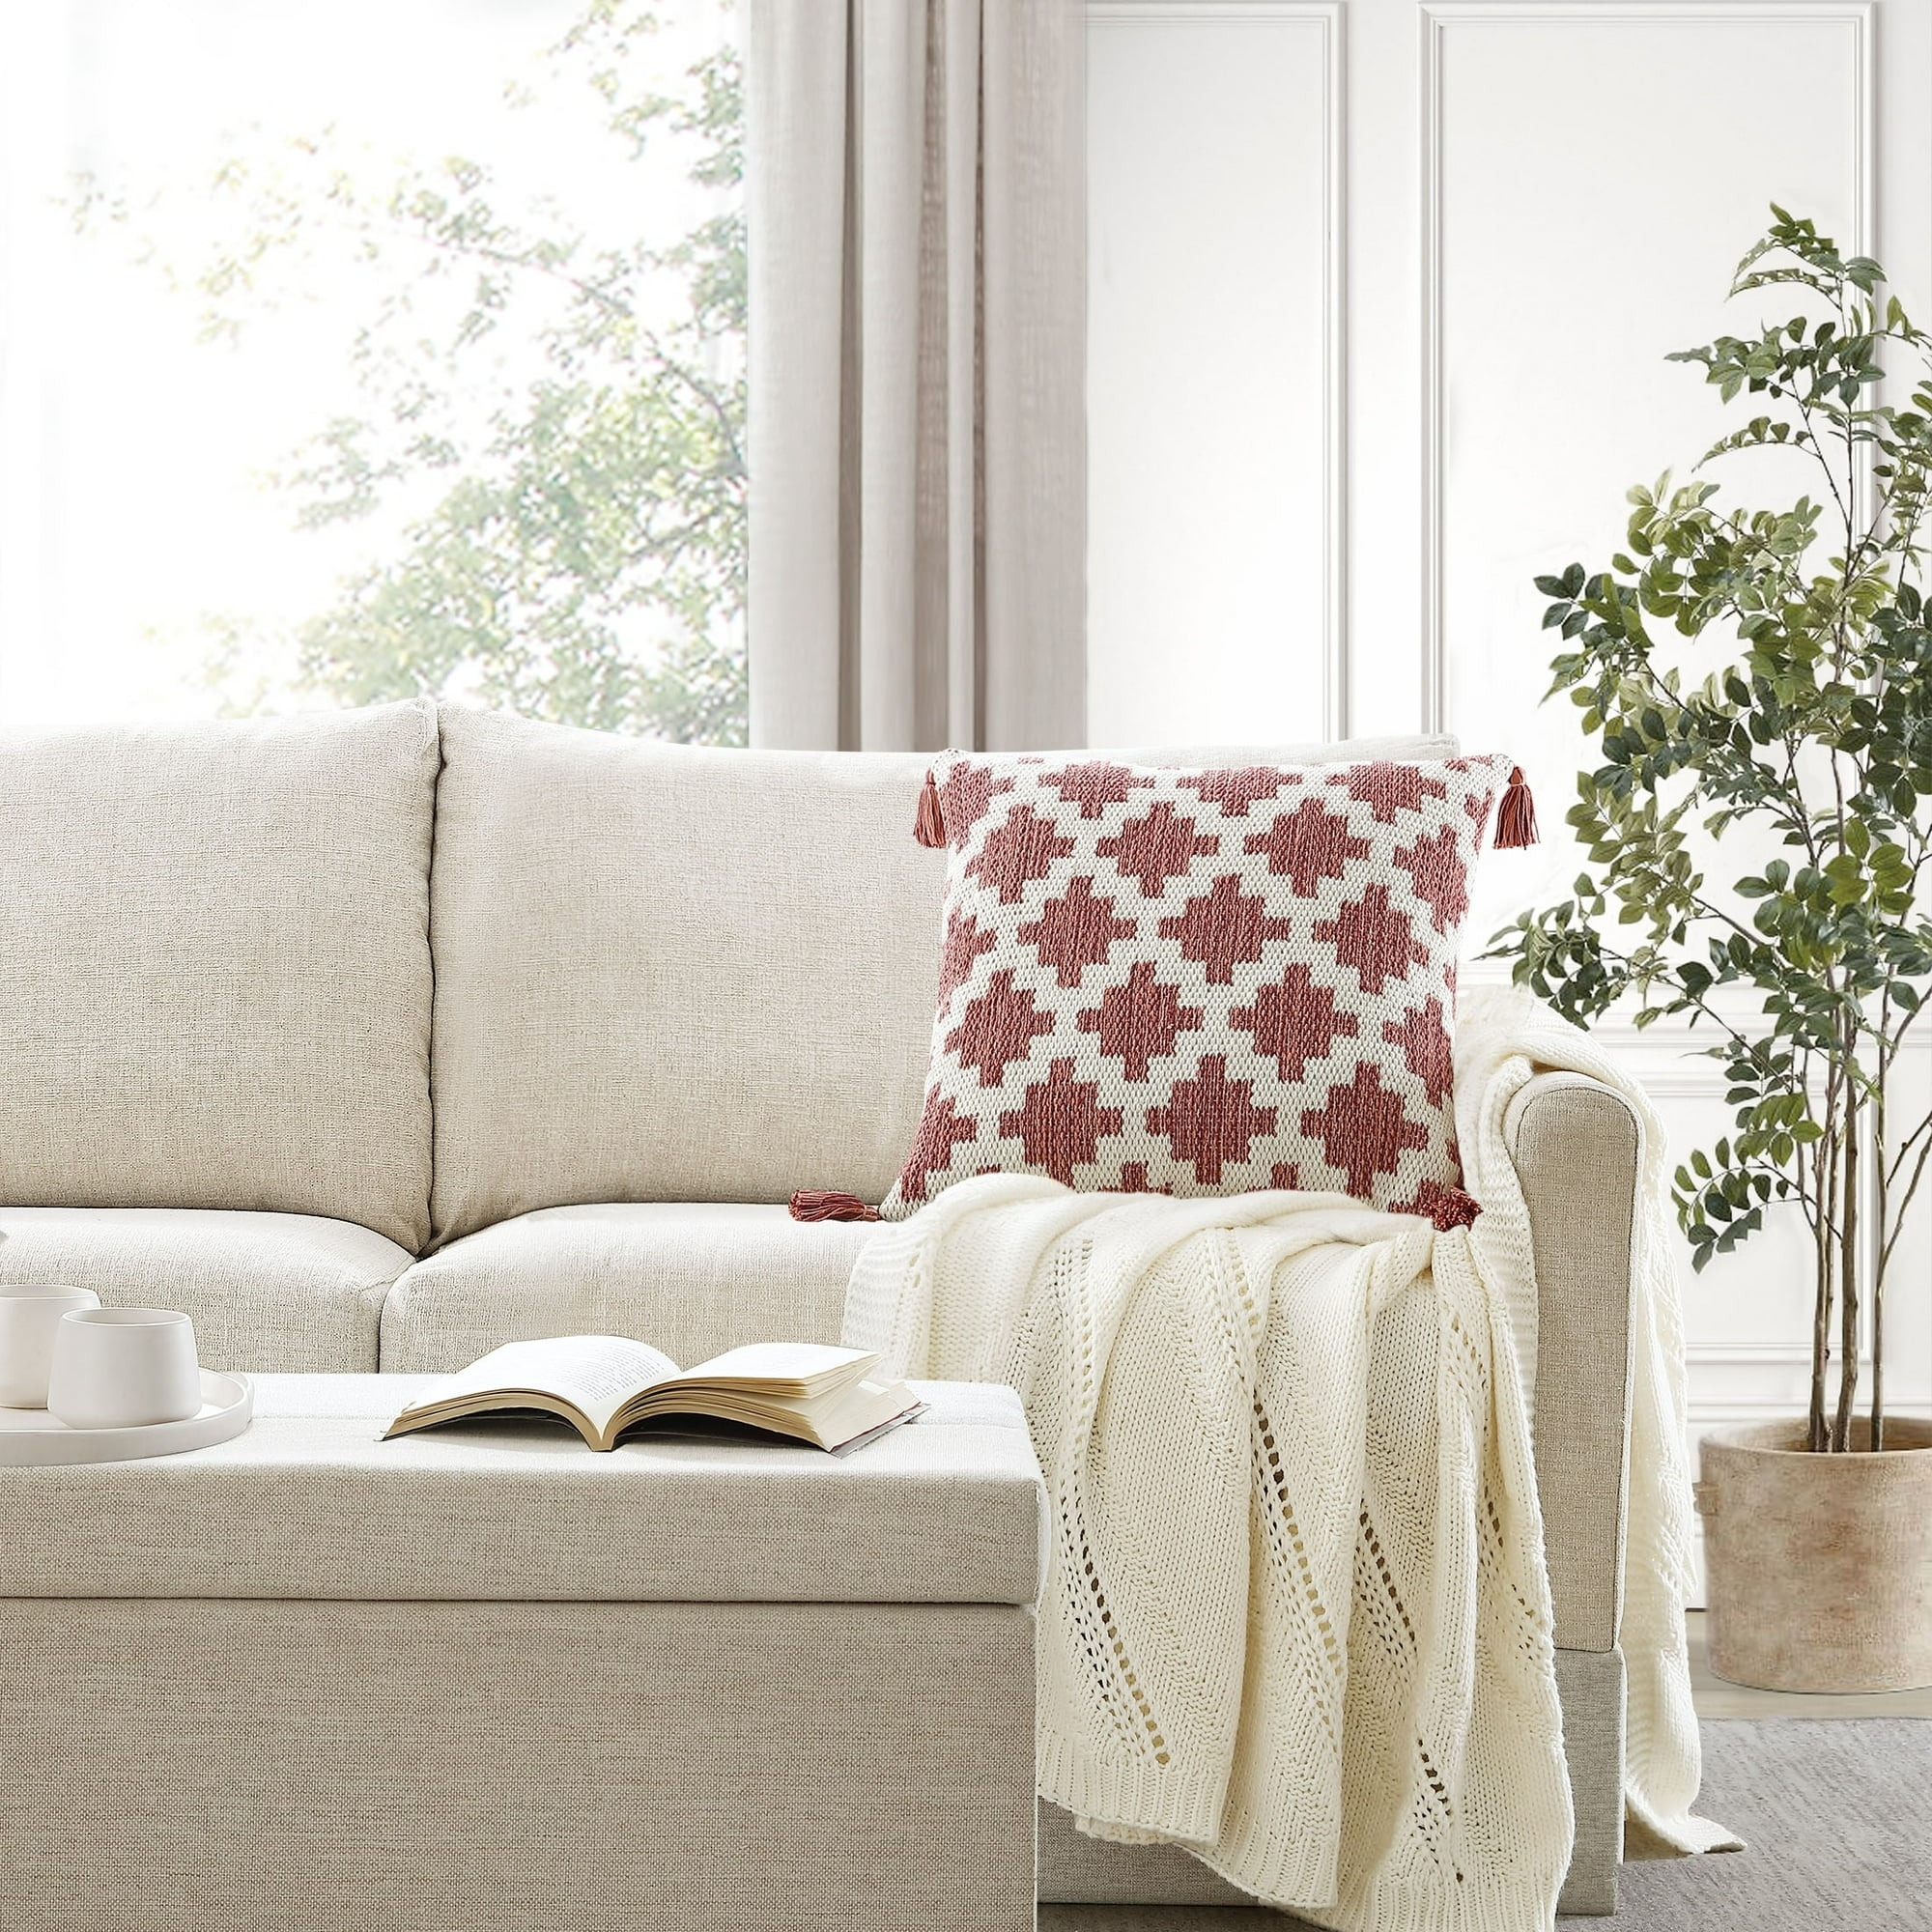 The red pillow with a geometric pattern resting on a couch